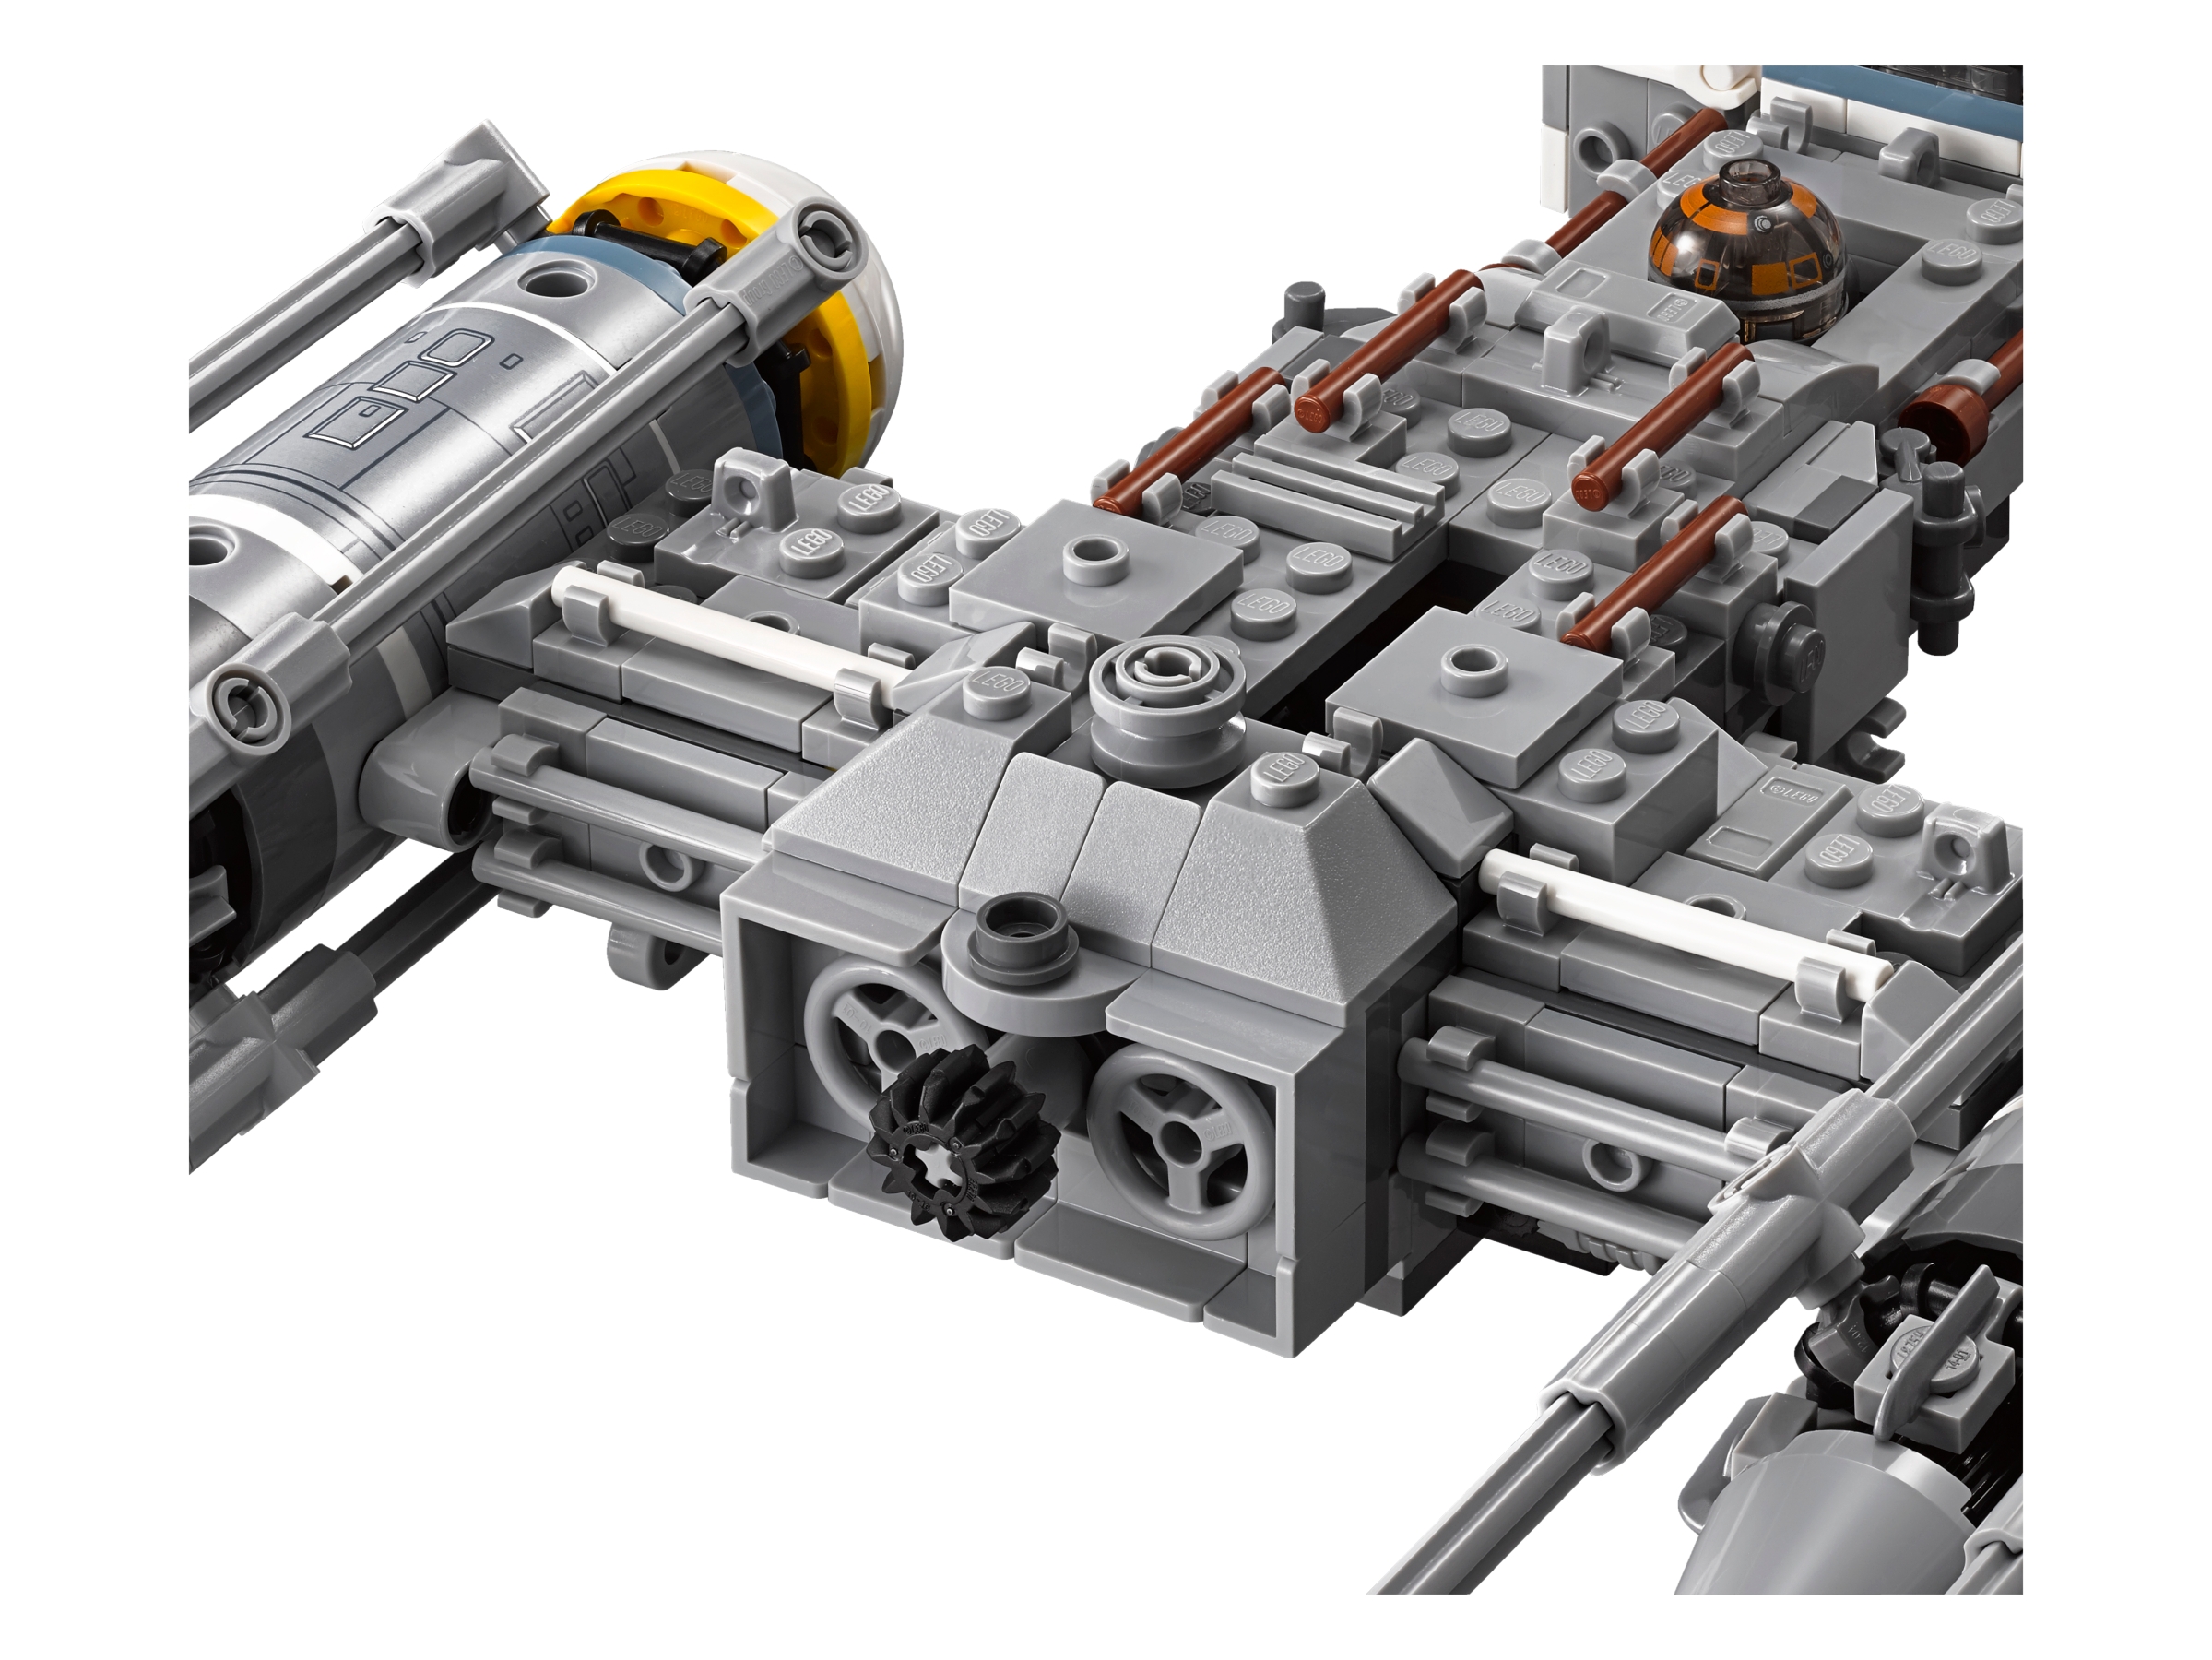 LEGO Star Wars Y-Wing Starfighter for sale online 75172 